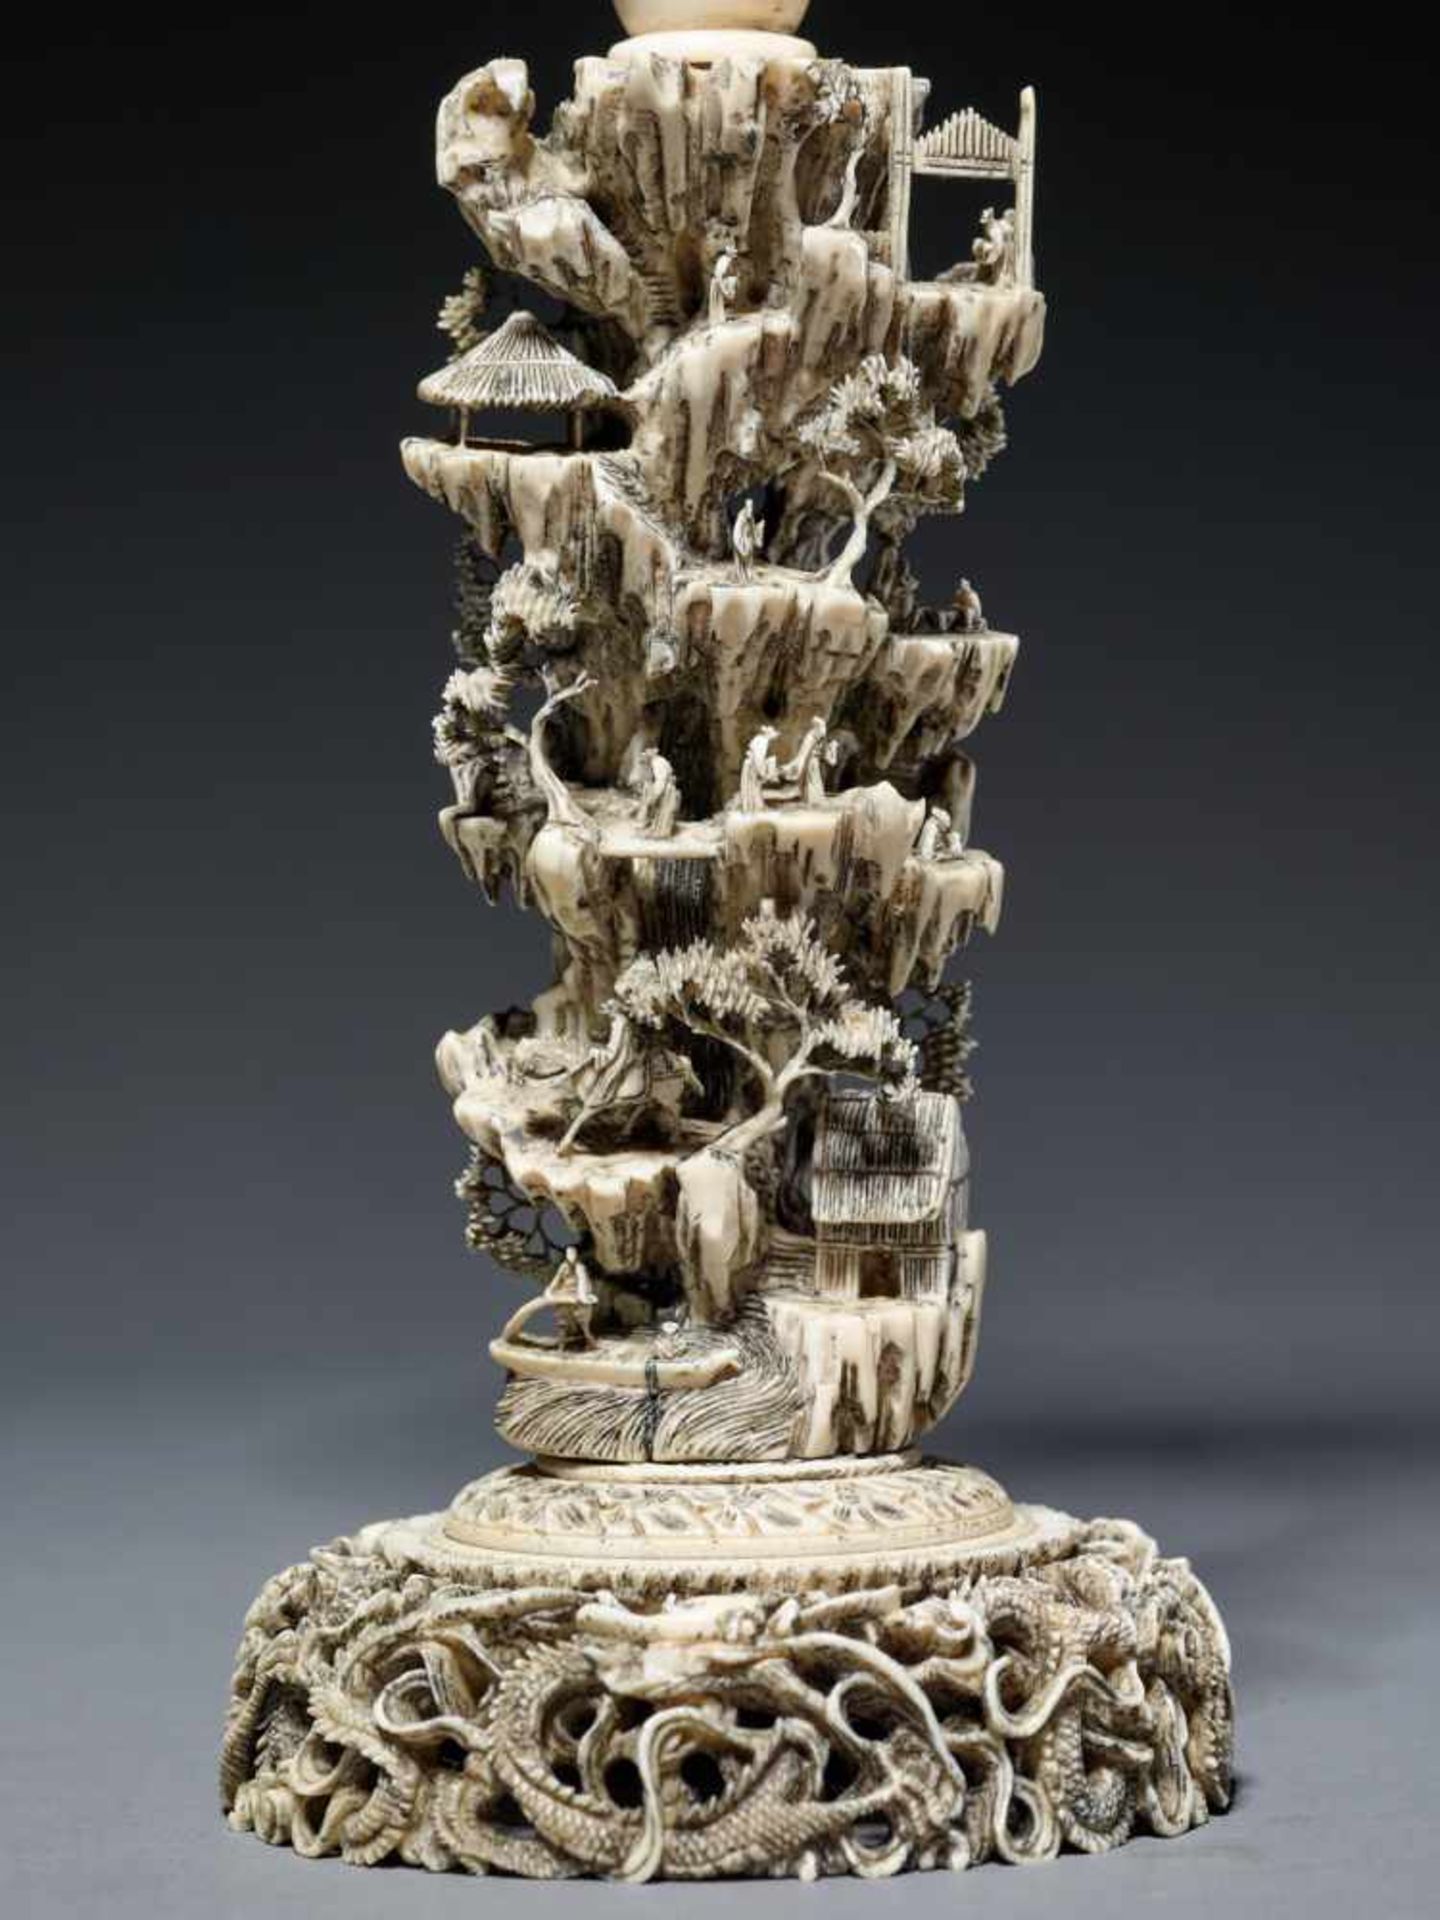 AN IMPORTANT CANTON SCHOOL ‘21-LAYER’ MAGIC IVORY BALL ON A TALL STAND, QING DYNASTY Carved ivory - Image 7 of 11